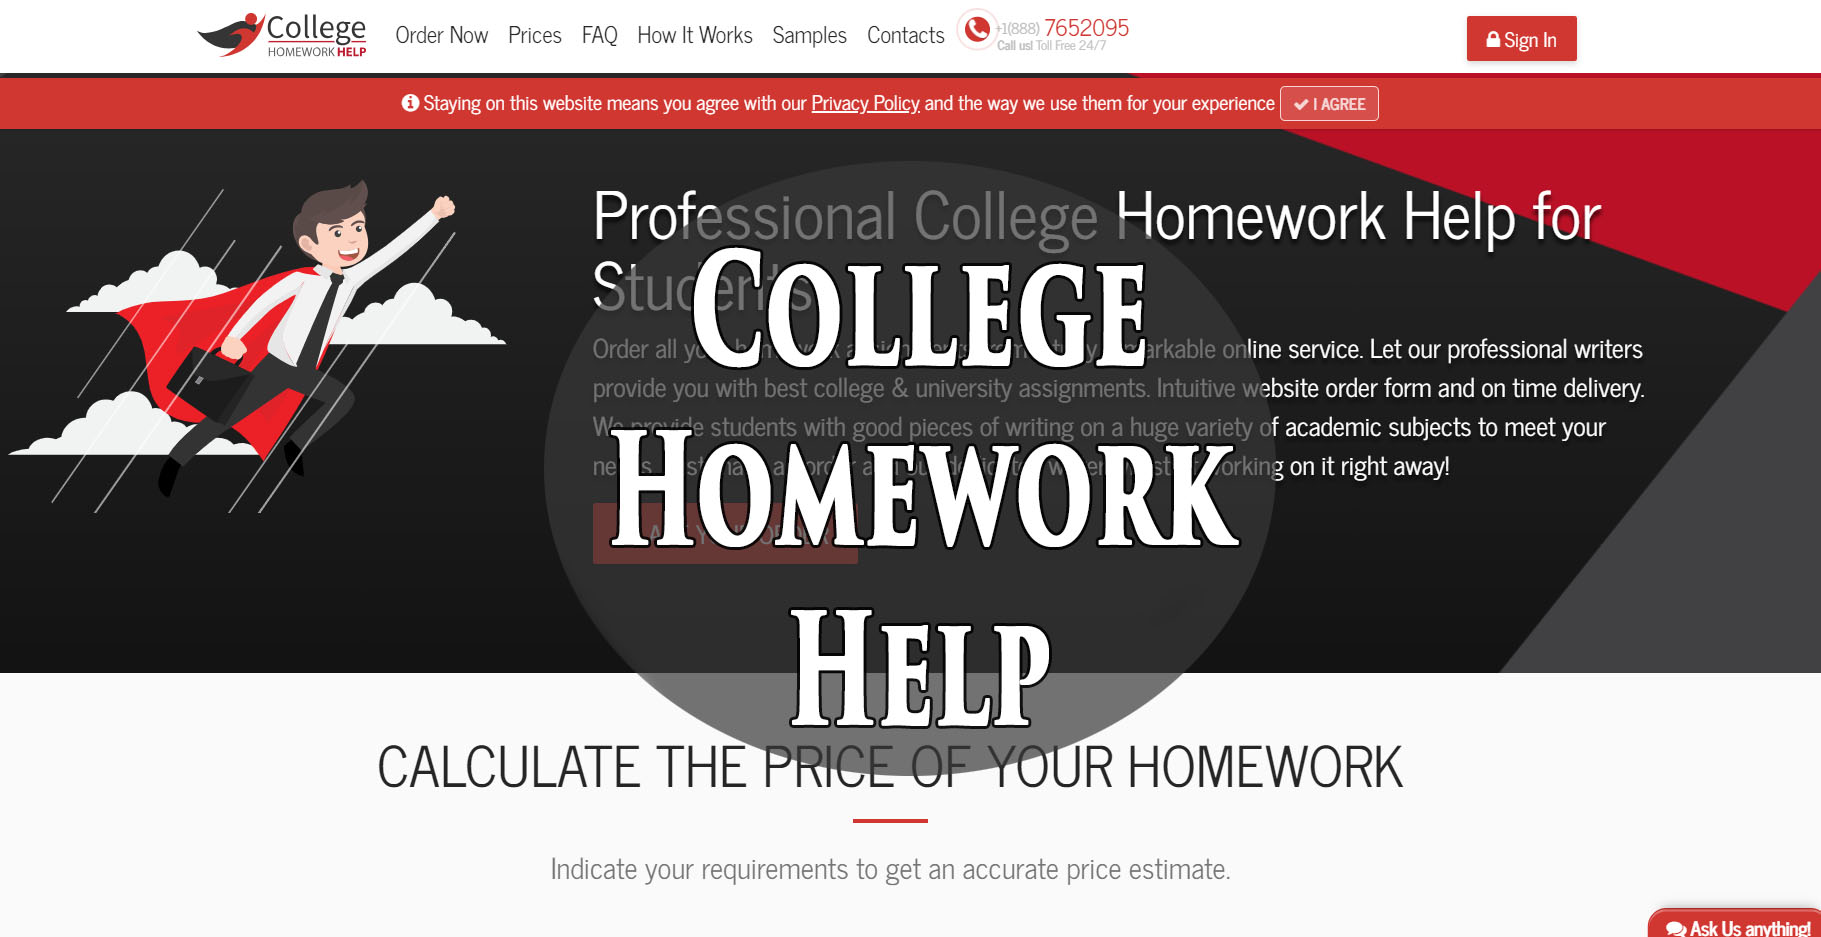 Free homework help for college students